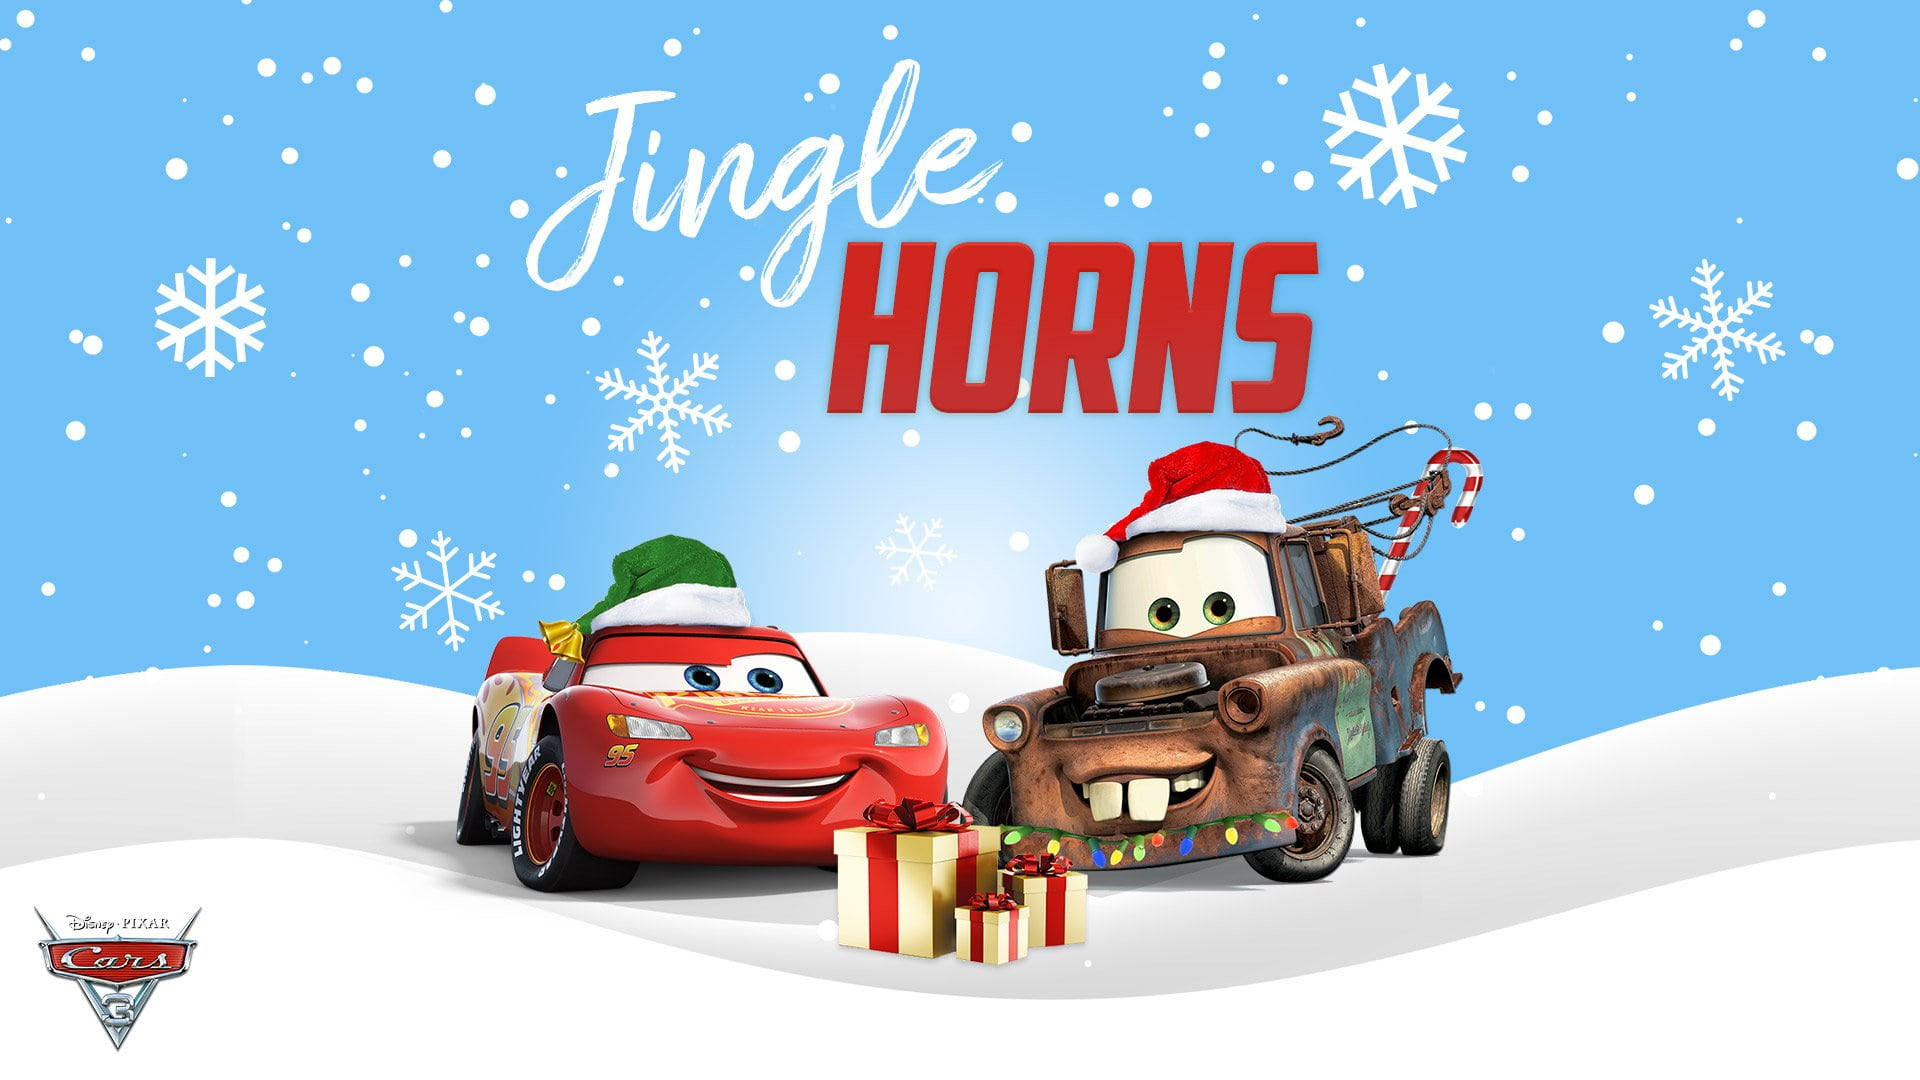 Exciting Holiday fun with Disney Cars Characters Wallpaper